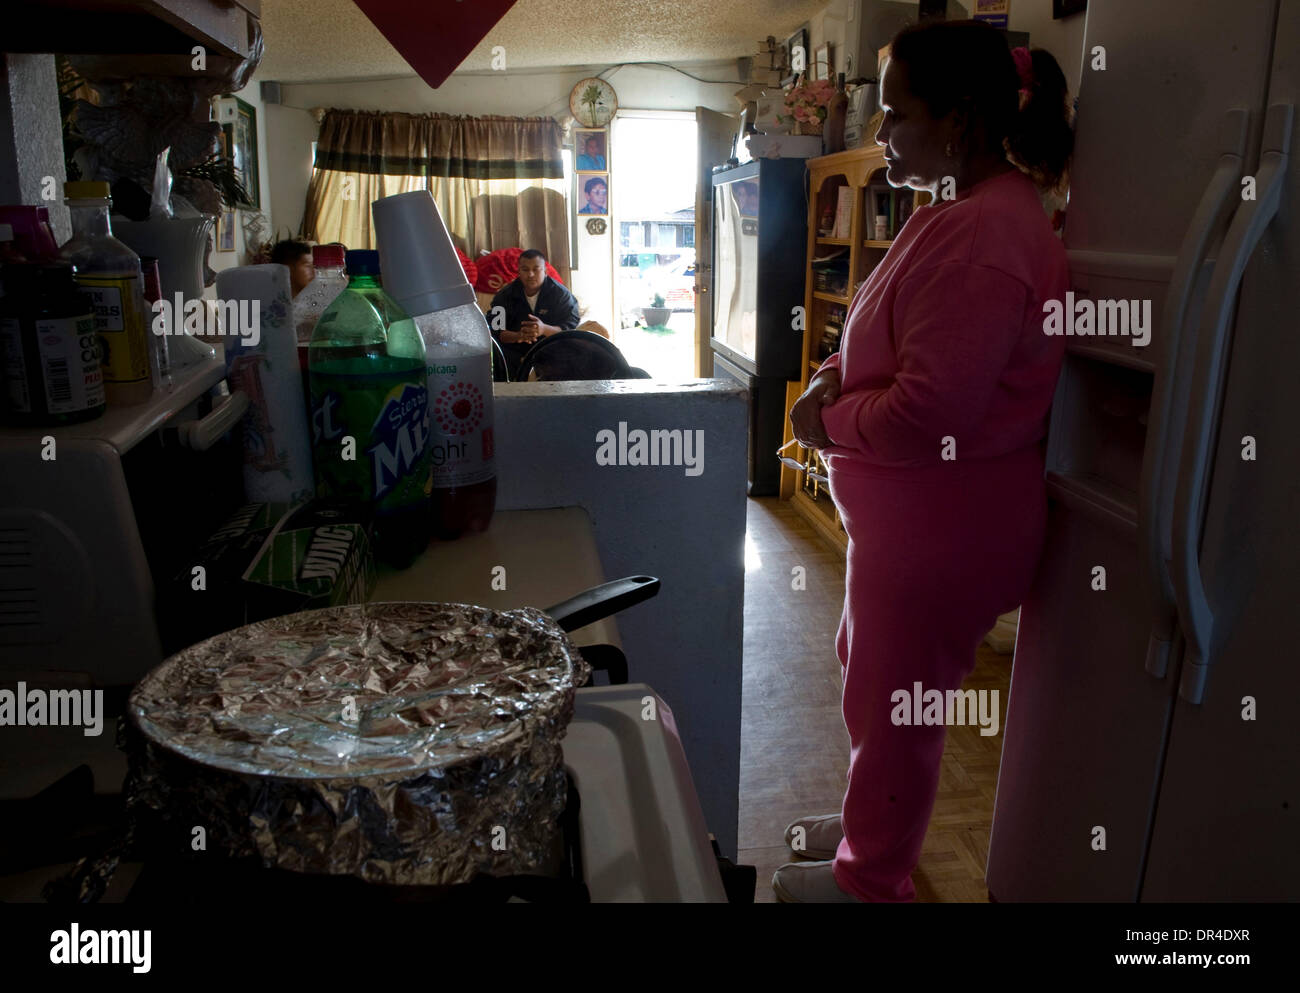 Feb 18, 2009 - Mendota, California, USA - MARIA AVILA, 56, said she boiled milk that would have gone bad to save it because she has run out of food and can't afford to waste anything. Farm workers who have been laid off due to the shortage of crops this year from lack of water are giving up their homes and worried about how they are going to eat and live. Story on the impact of wat Stock Photo